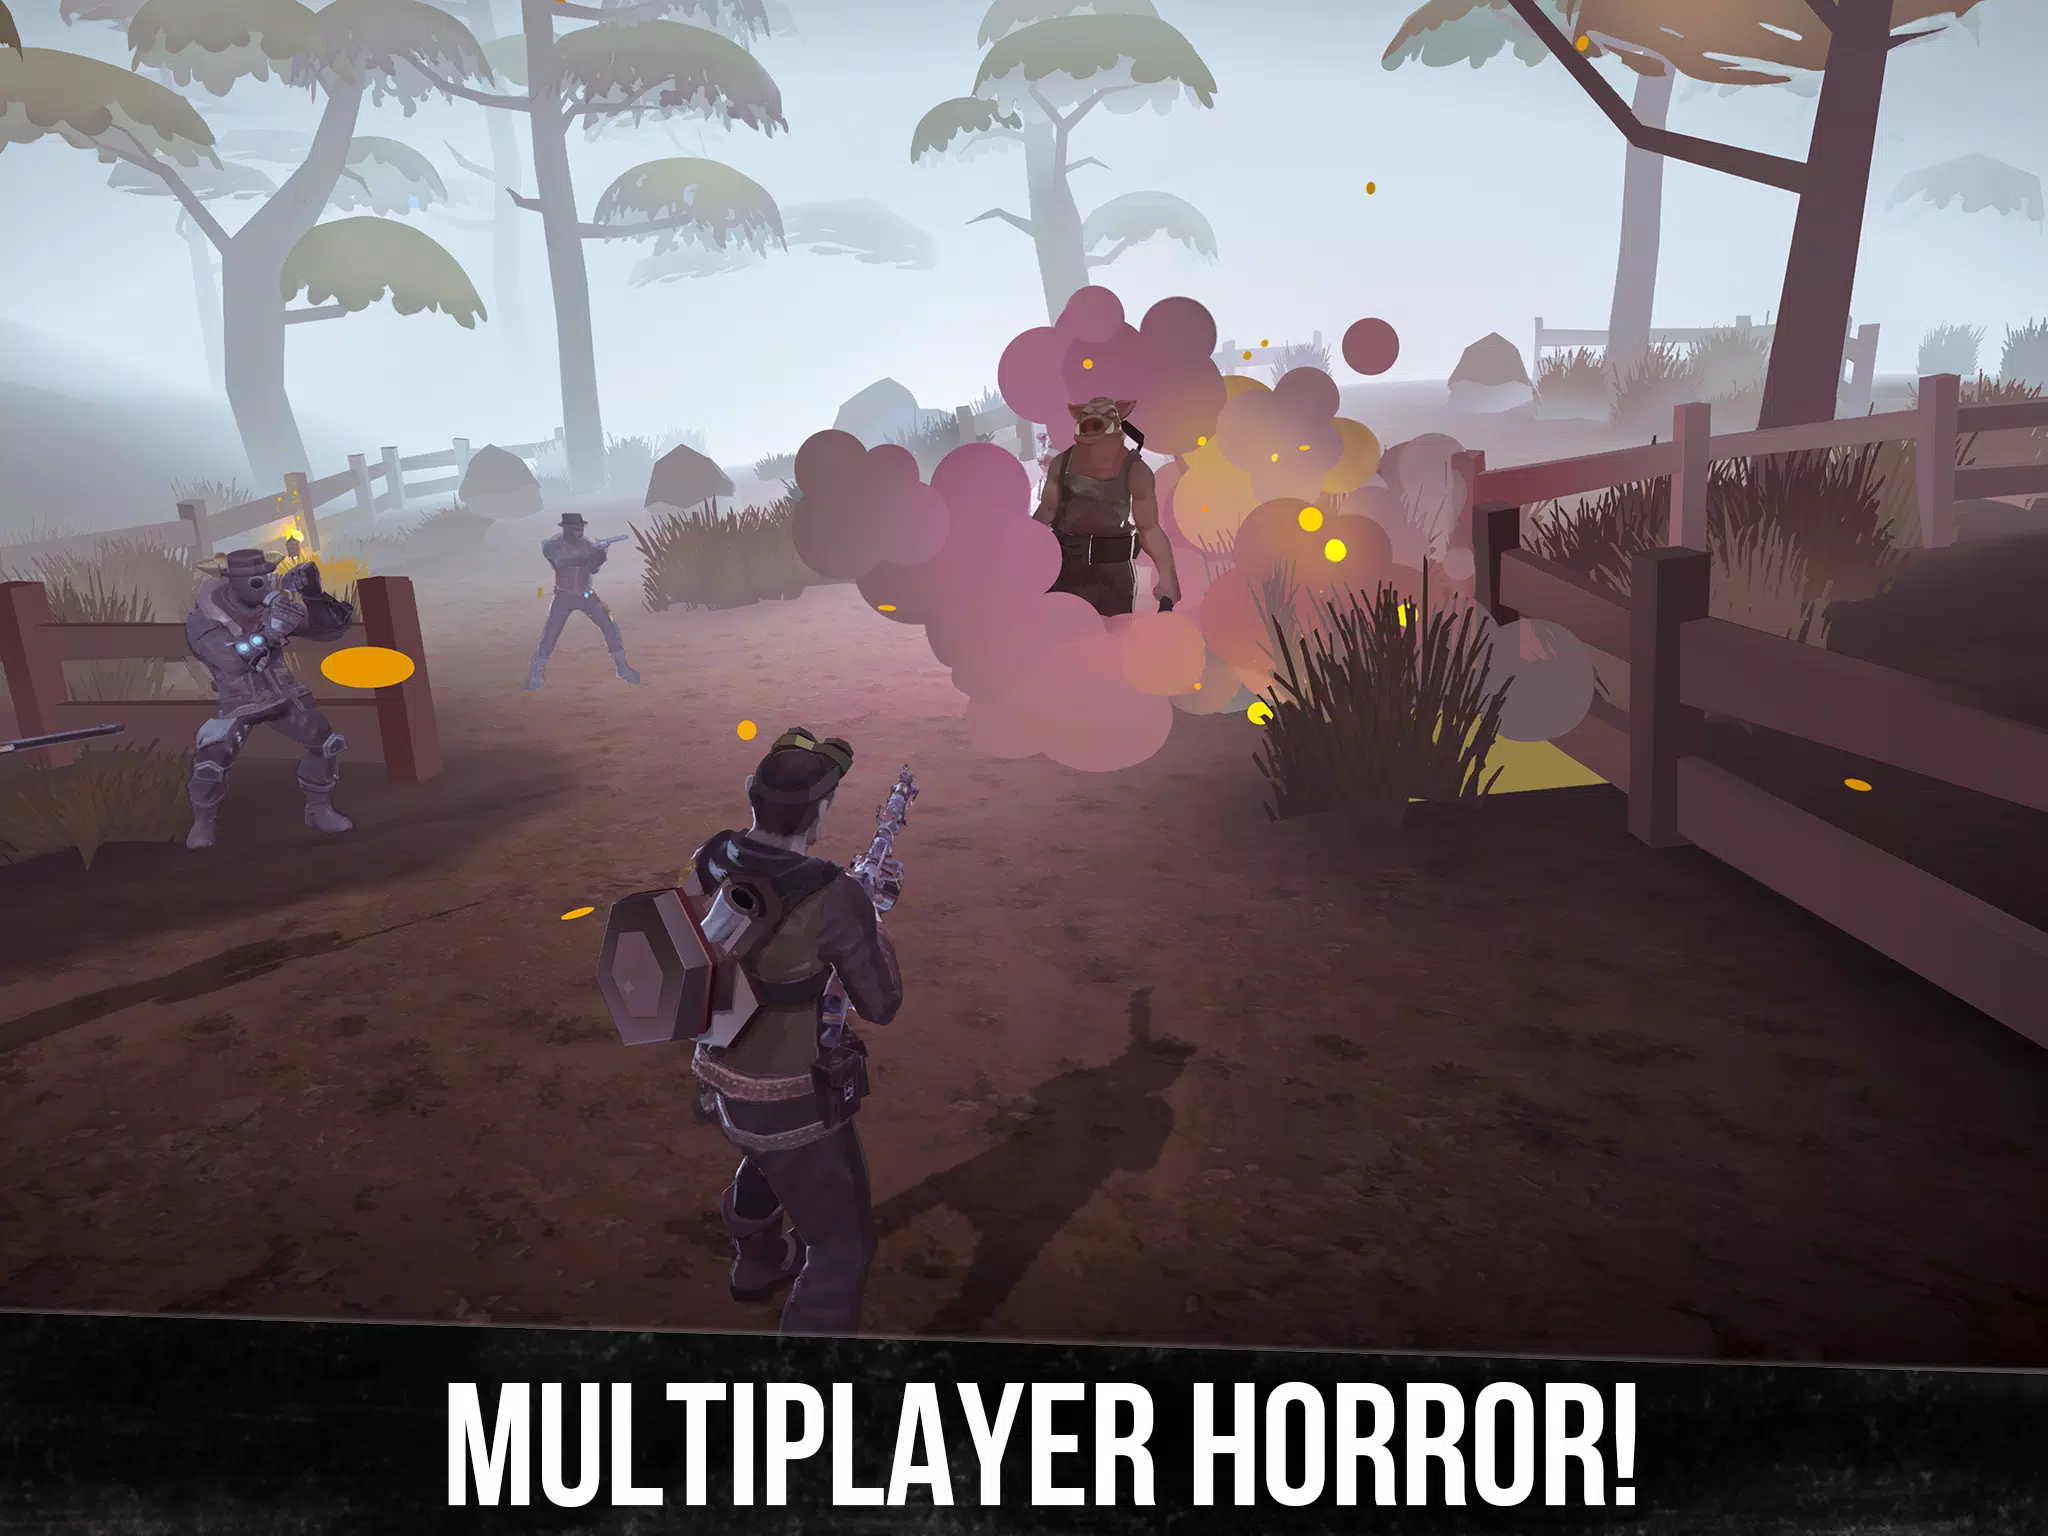 Another Hunt APK